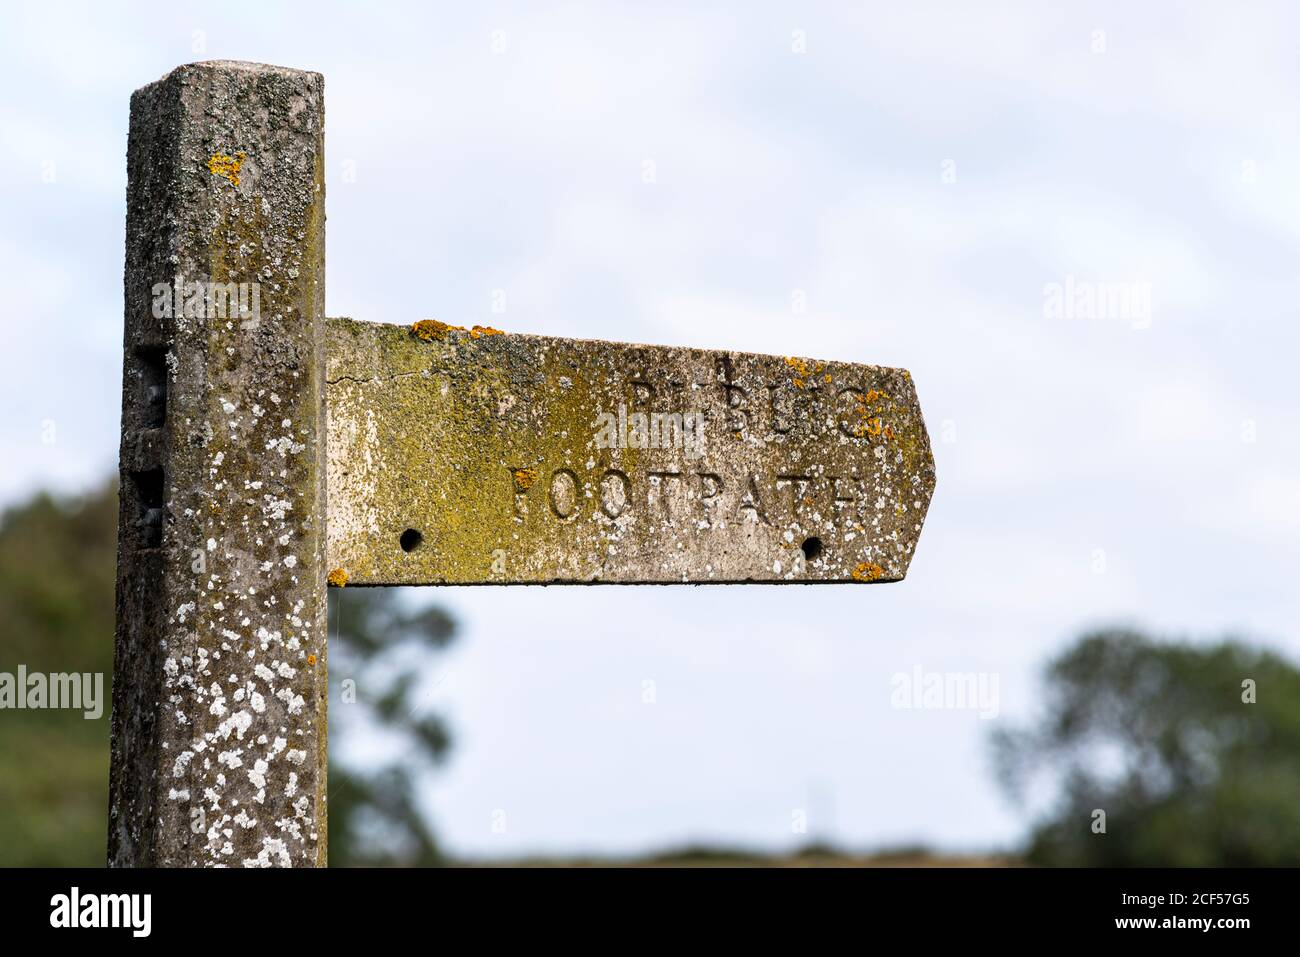 Old, vintage concrete public footpath signpost in Great Wakering, near Southend, Essex, UK. Covered in green lichen and algae. Decaying Stock Photo